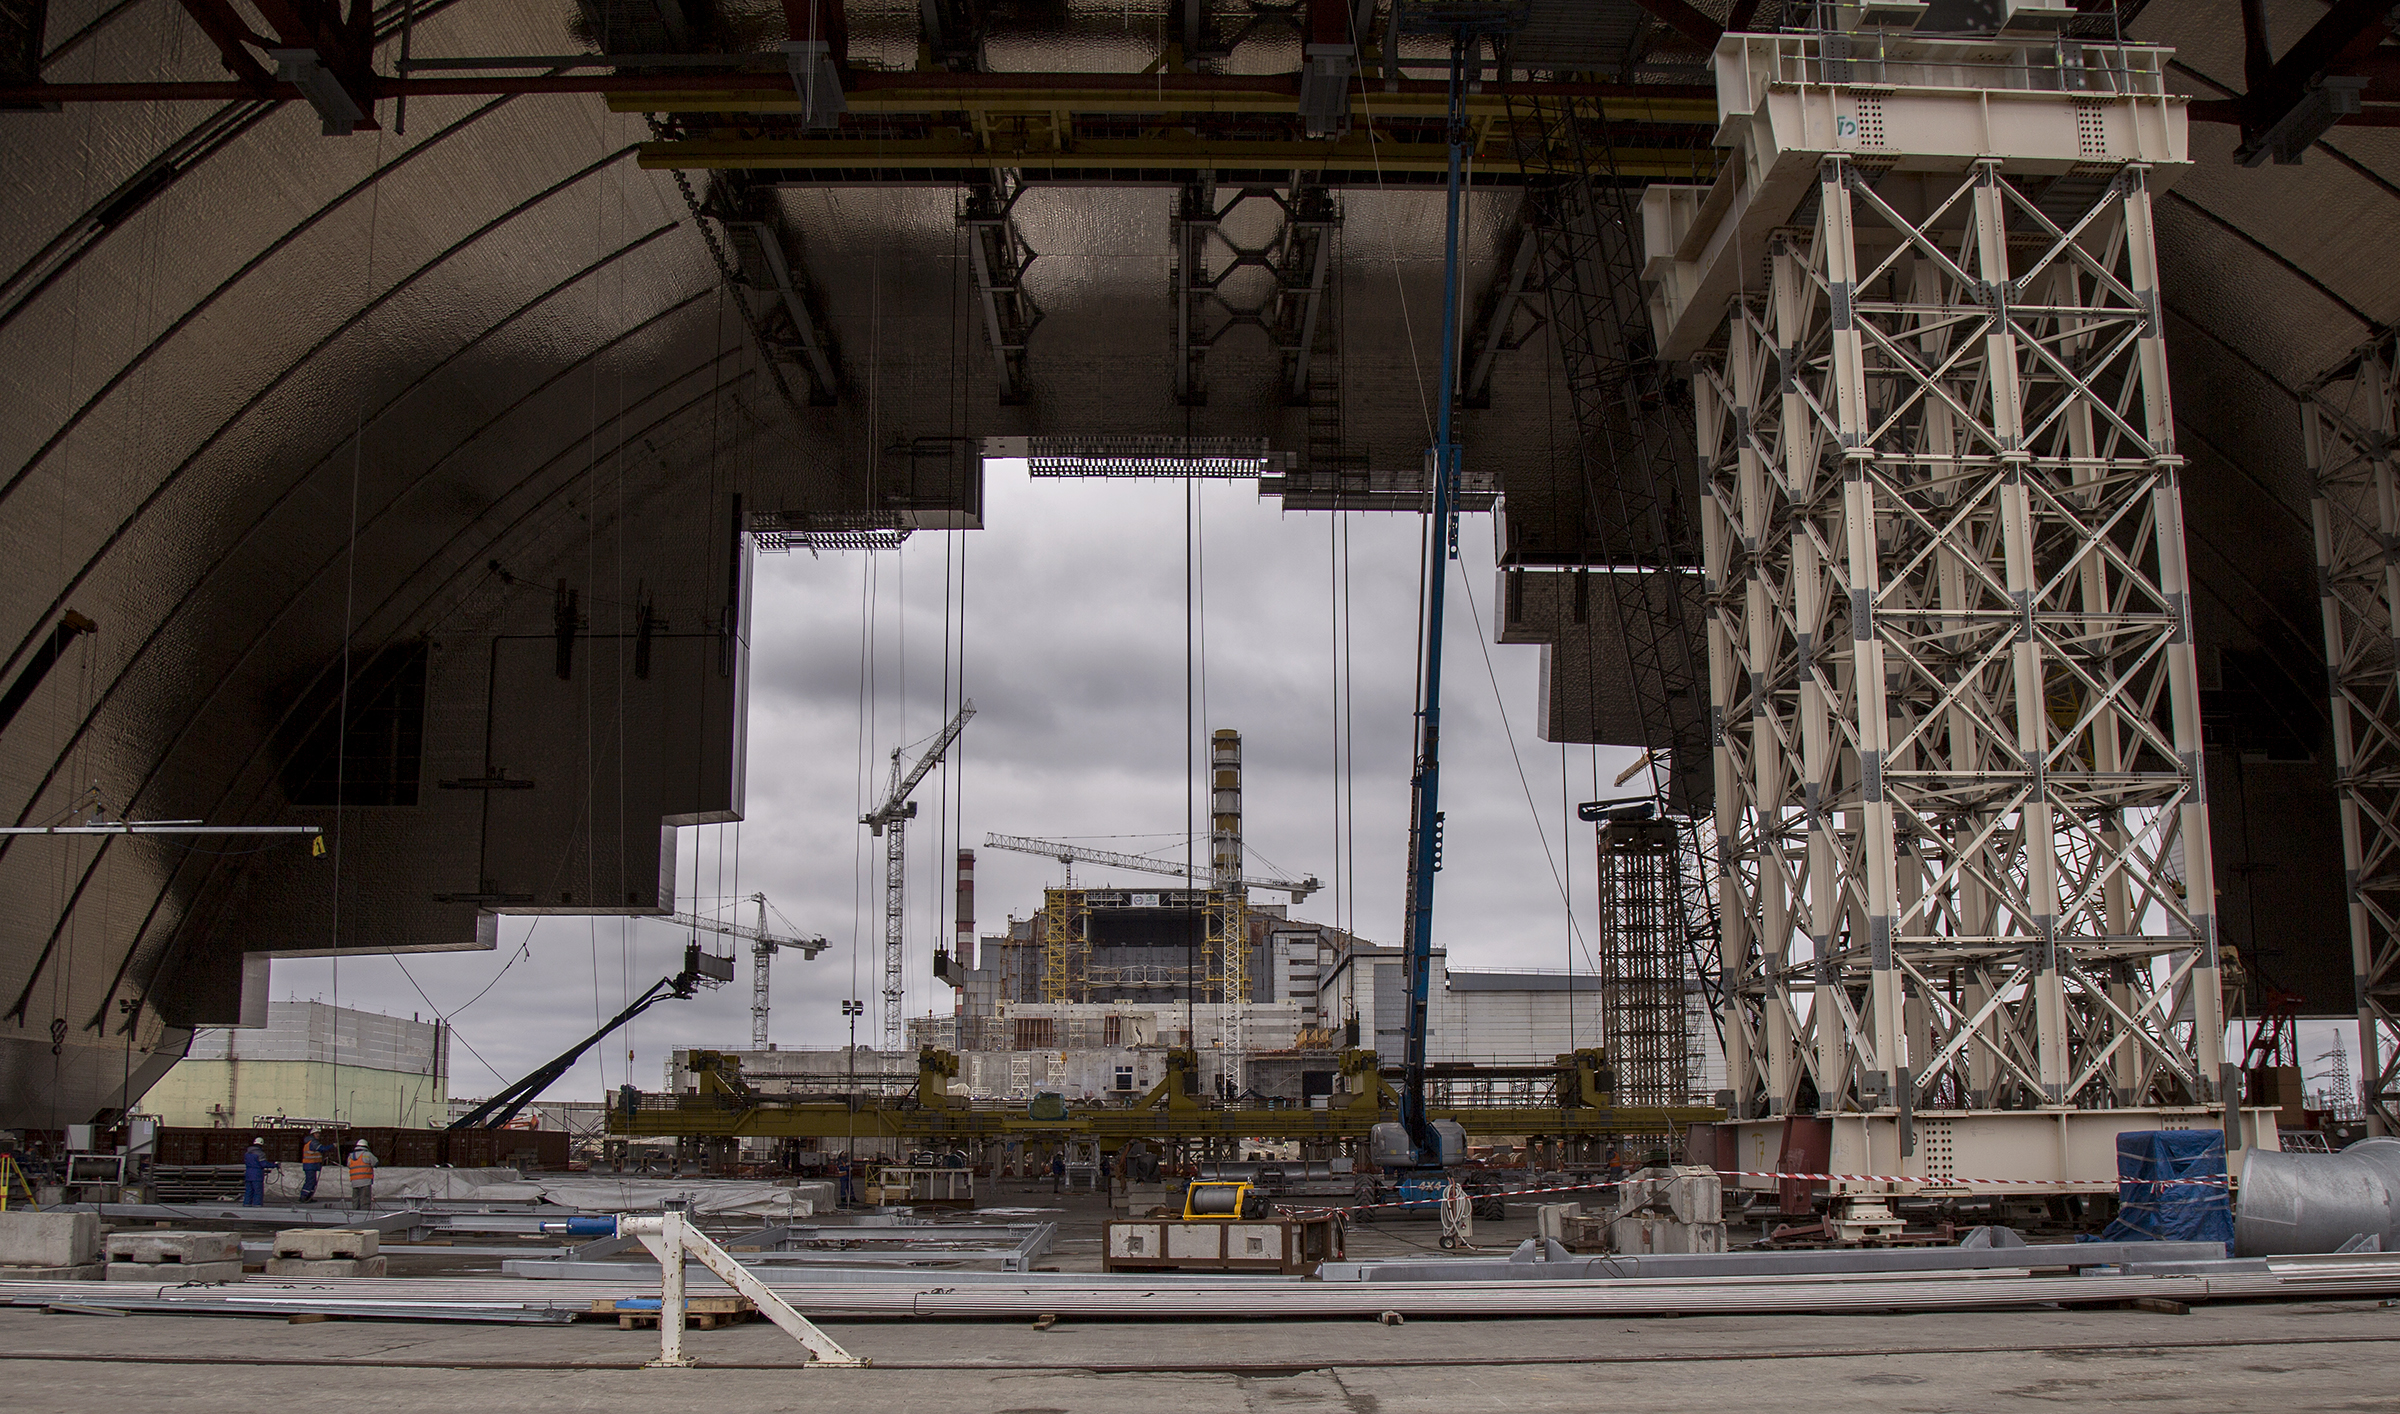 30 years after Chernobyl disaster, an arch rises to seal melted reactor